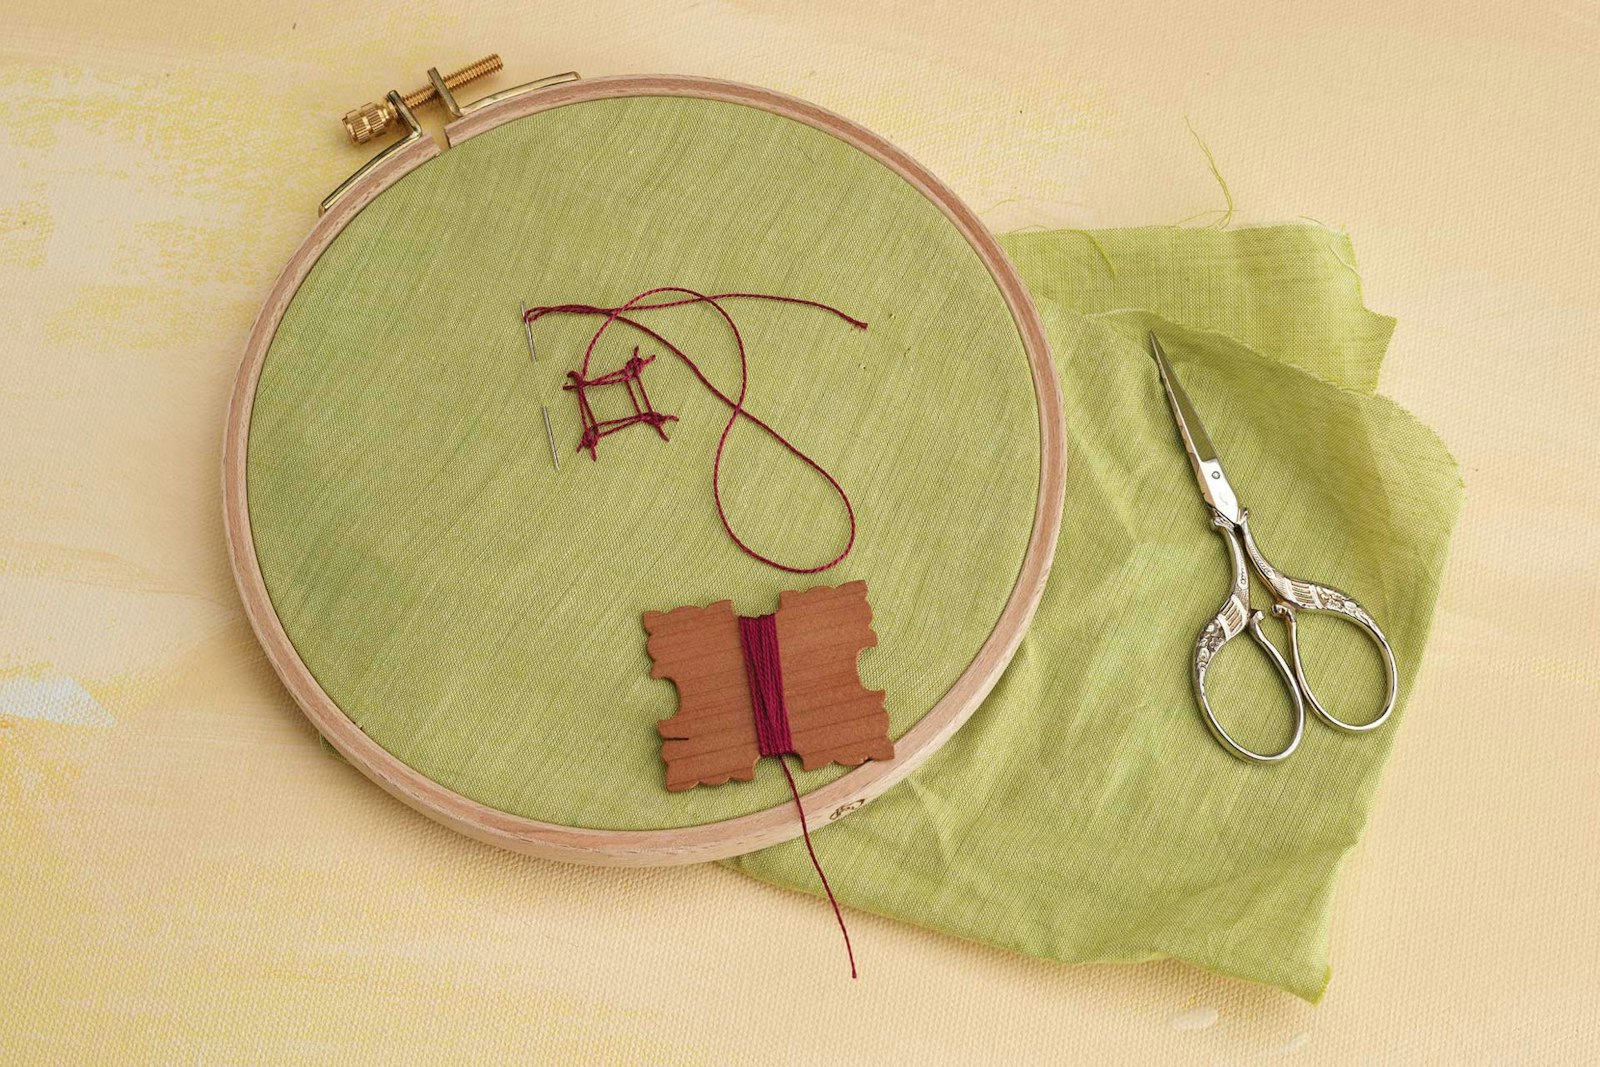 Bonnet Stitch In Hand Embroidery Stitches Tutorial 